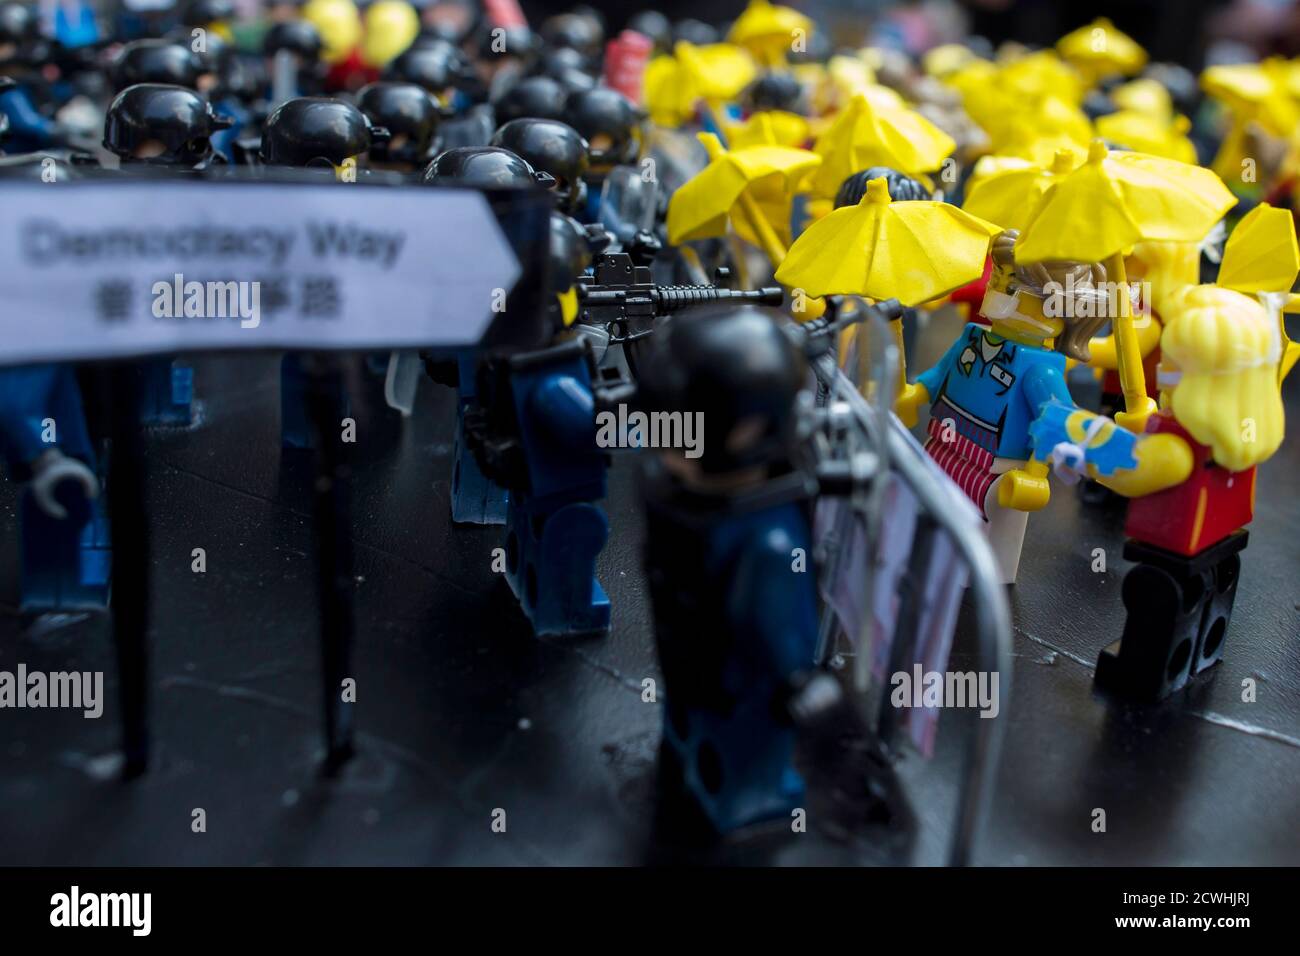 Toy Lego characters depicting a scene of protesters confronting riot police  are seen on a table outside the government headquarters in Hong Kong  October 20, 2014. A deepening sense of impasse gripped